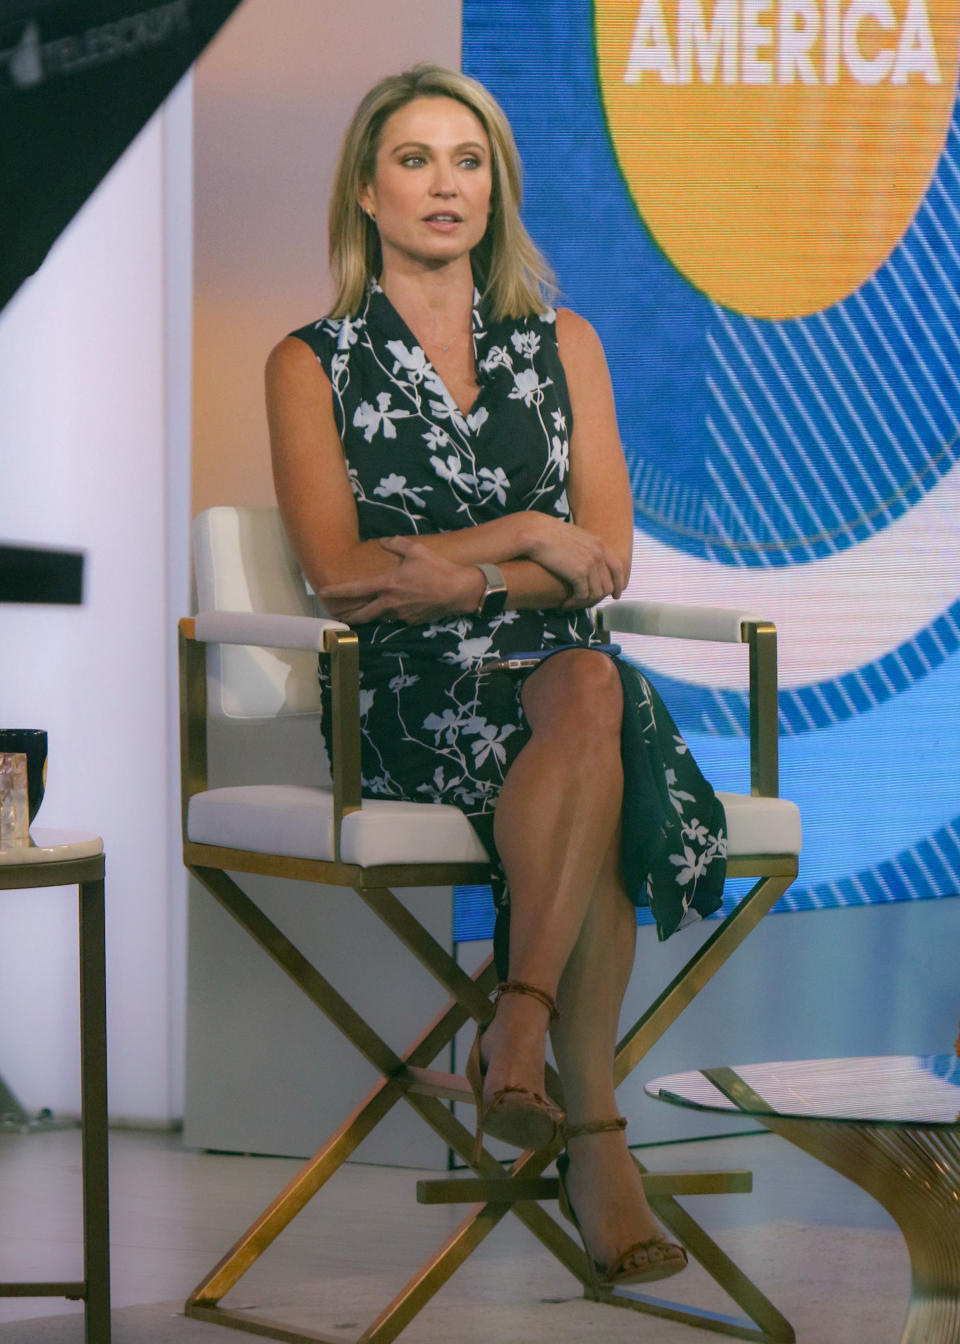 Former GMA 3 Host Amy Robach Is ‘Lobbying Hard for Her Return’